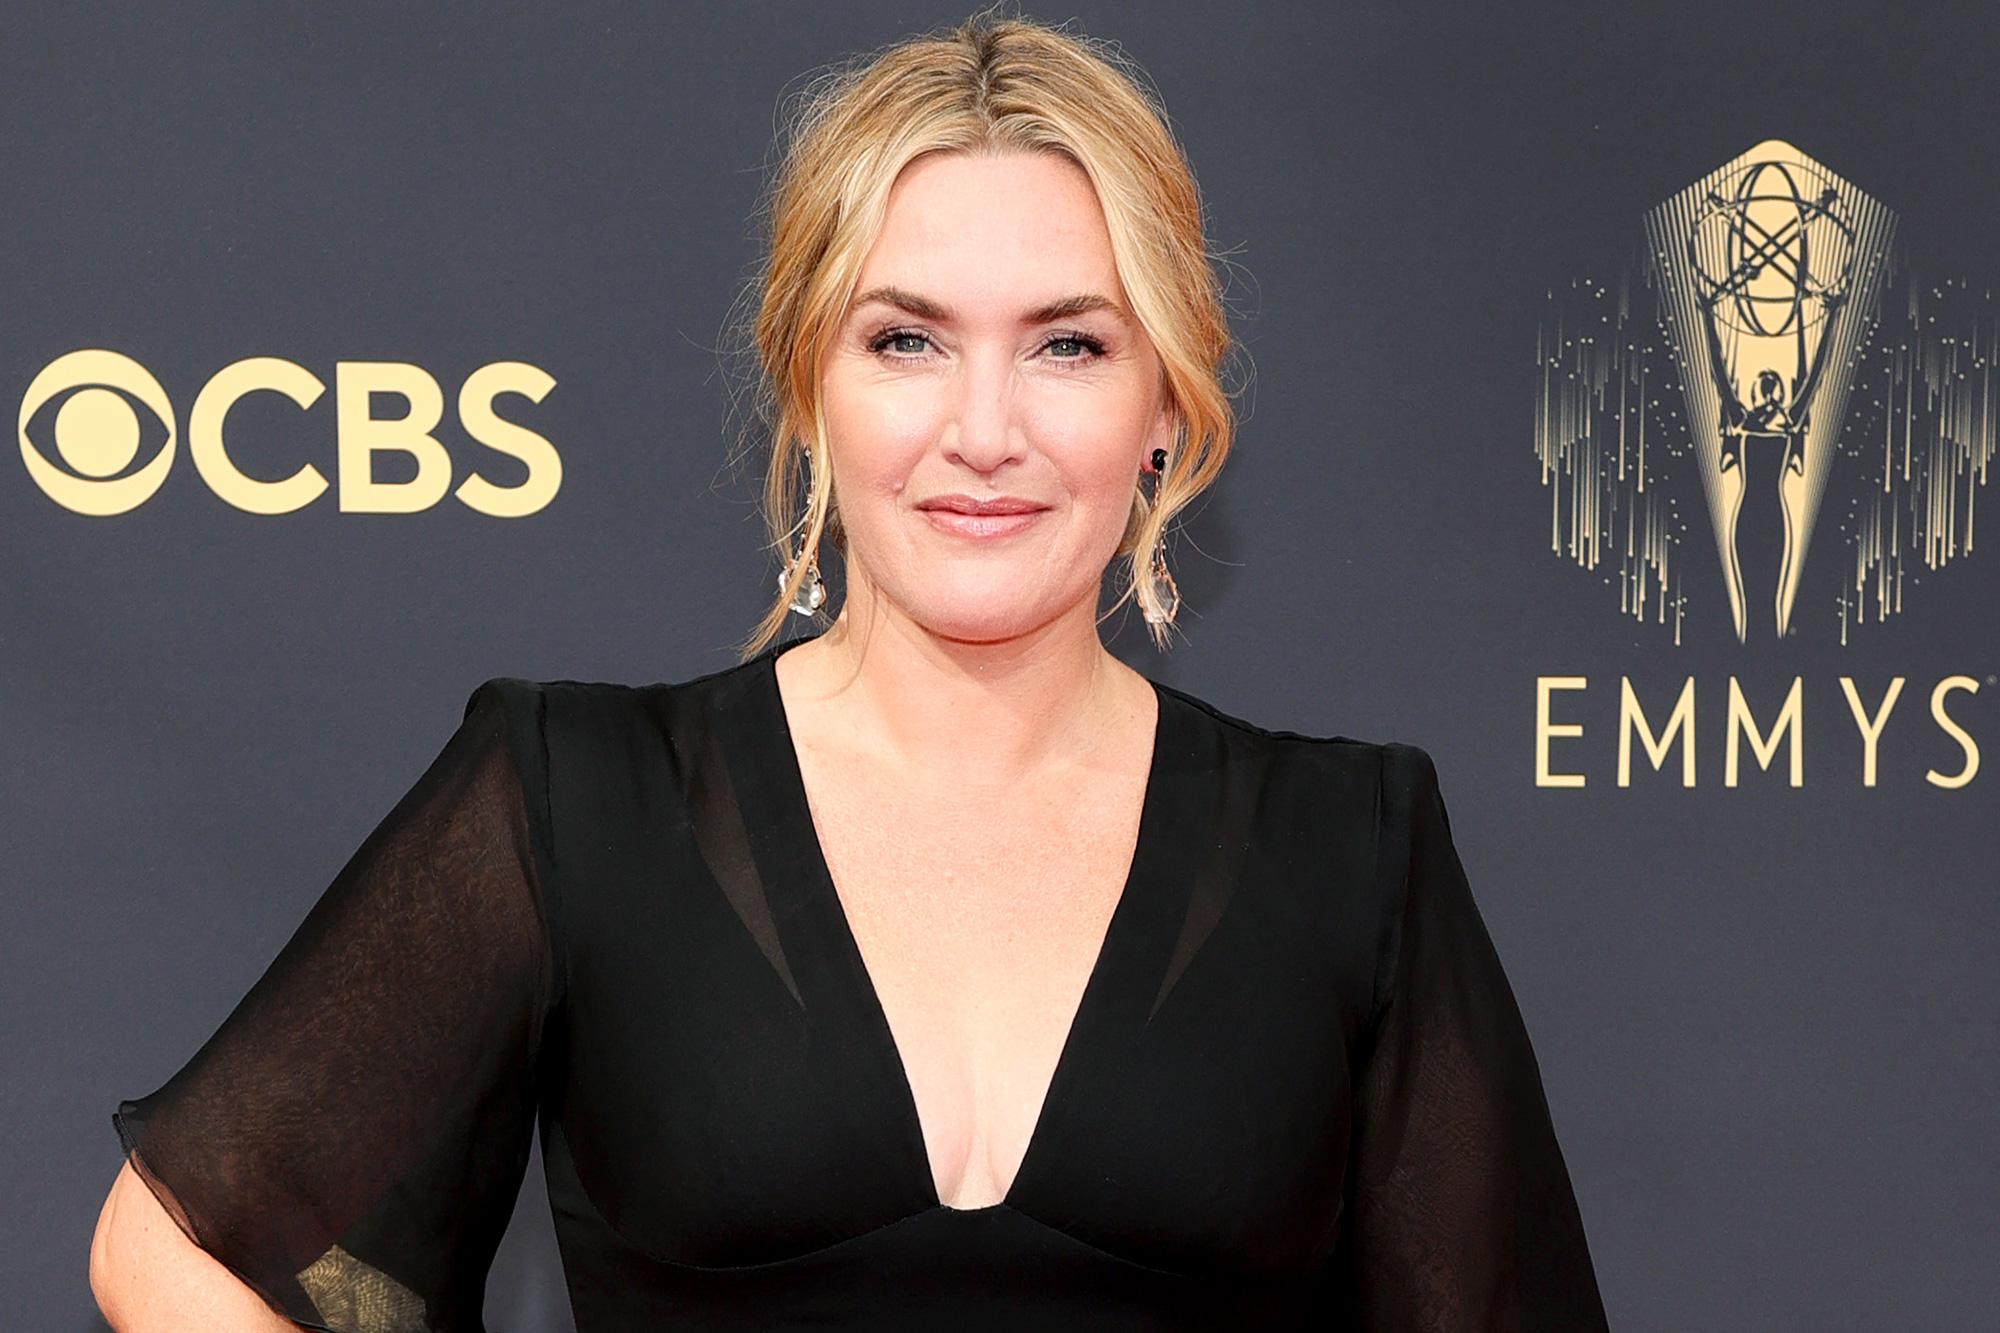 Kate Winslet is returning to HBO for her next limited series Nestia